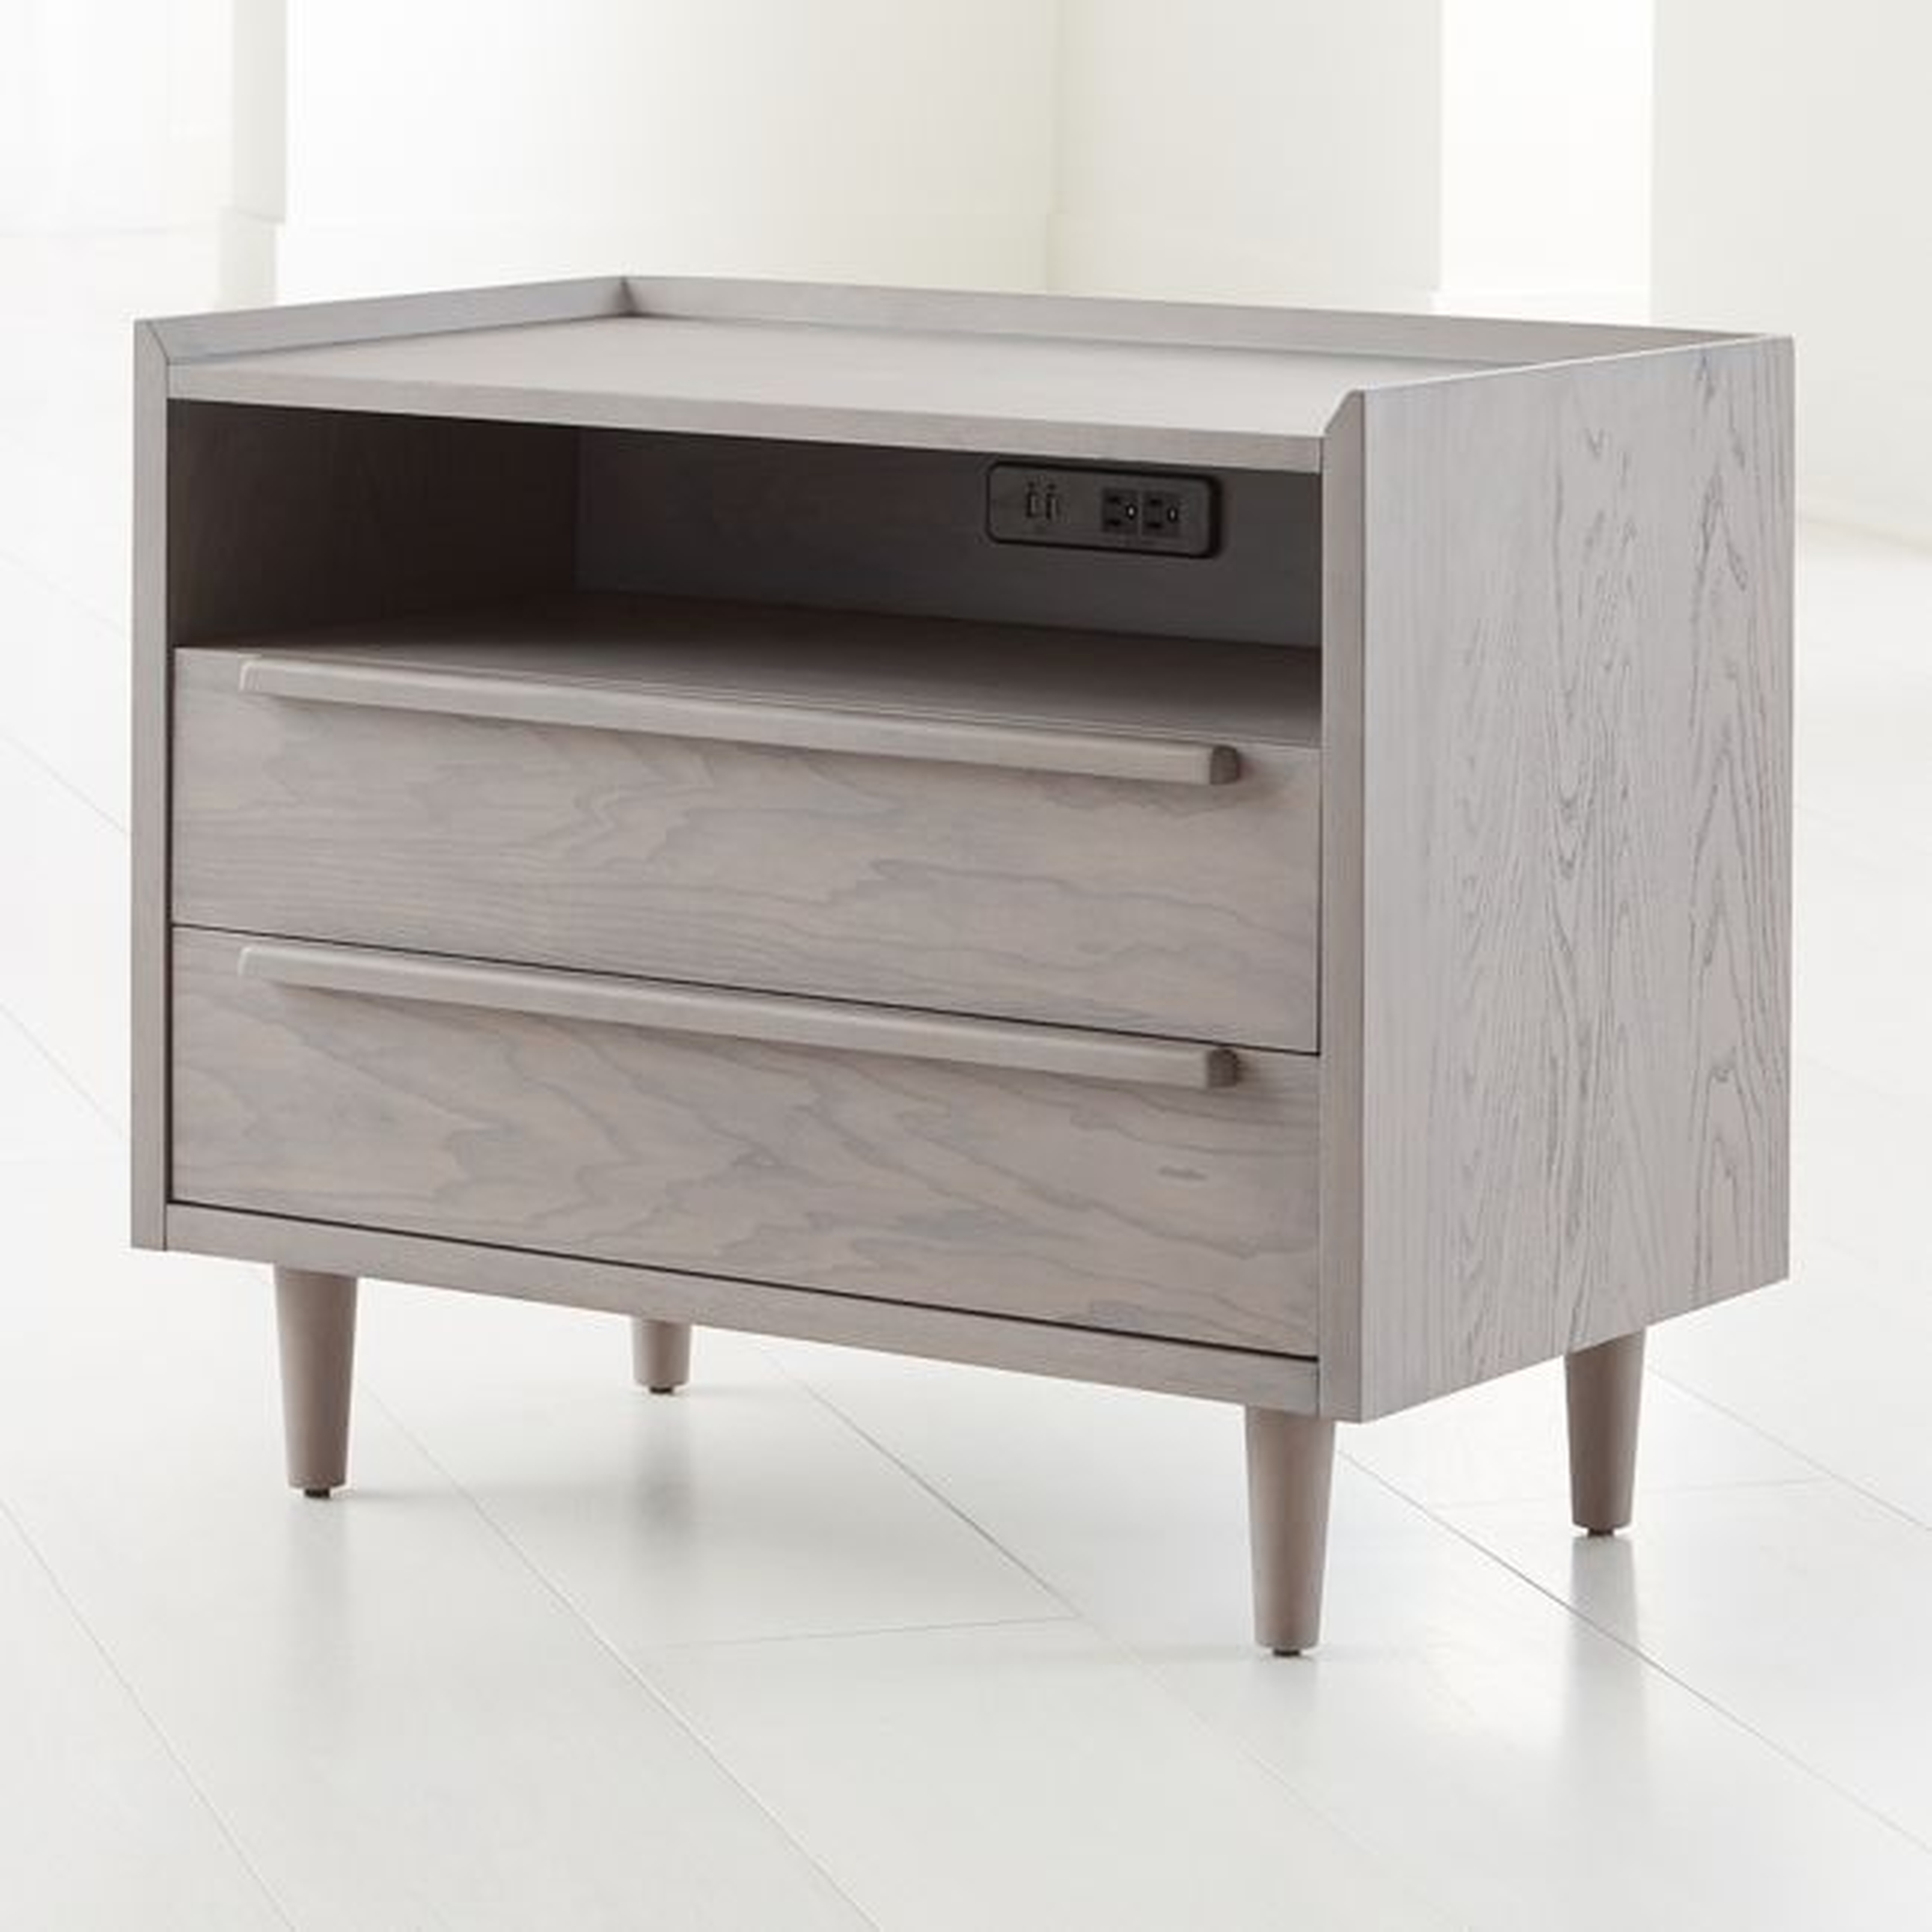 Tate Stone 2-Drawer Mid-Century Nightstand with Power Outlet - Crate and Barrel